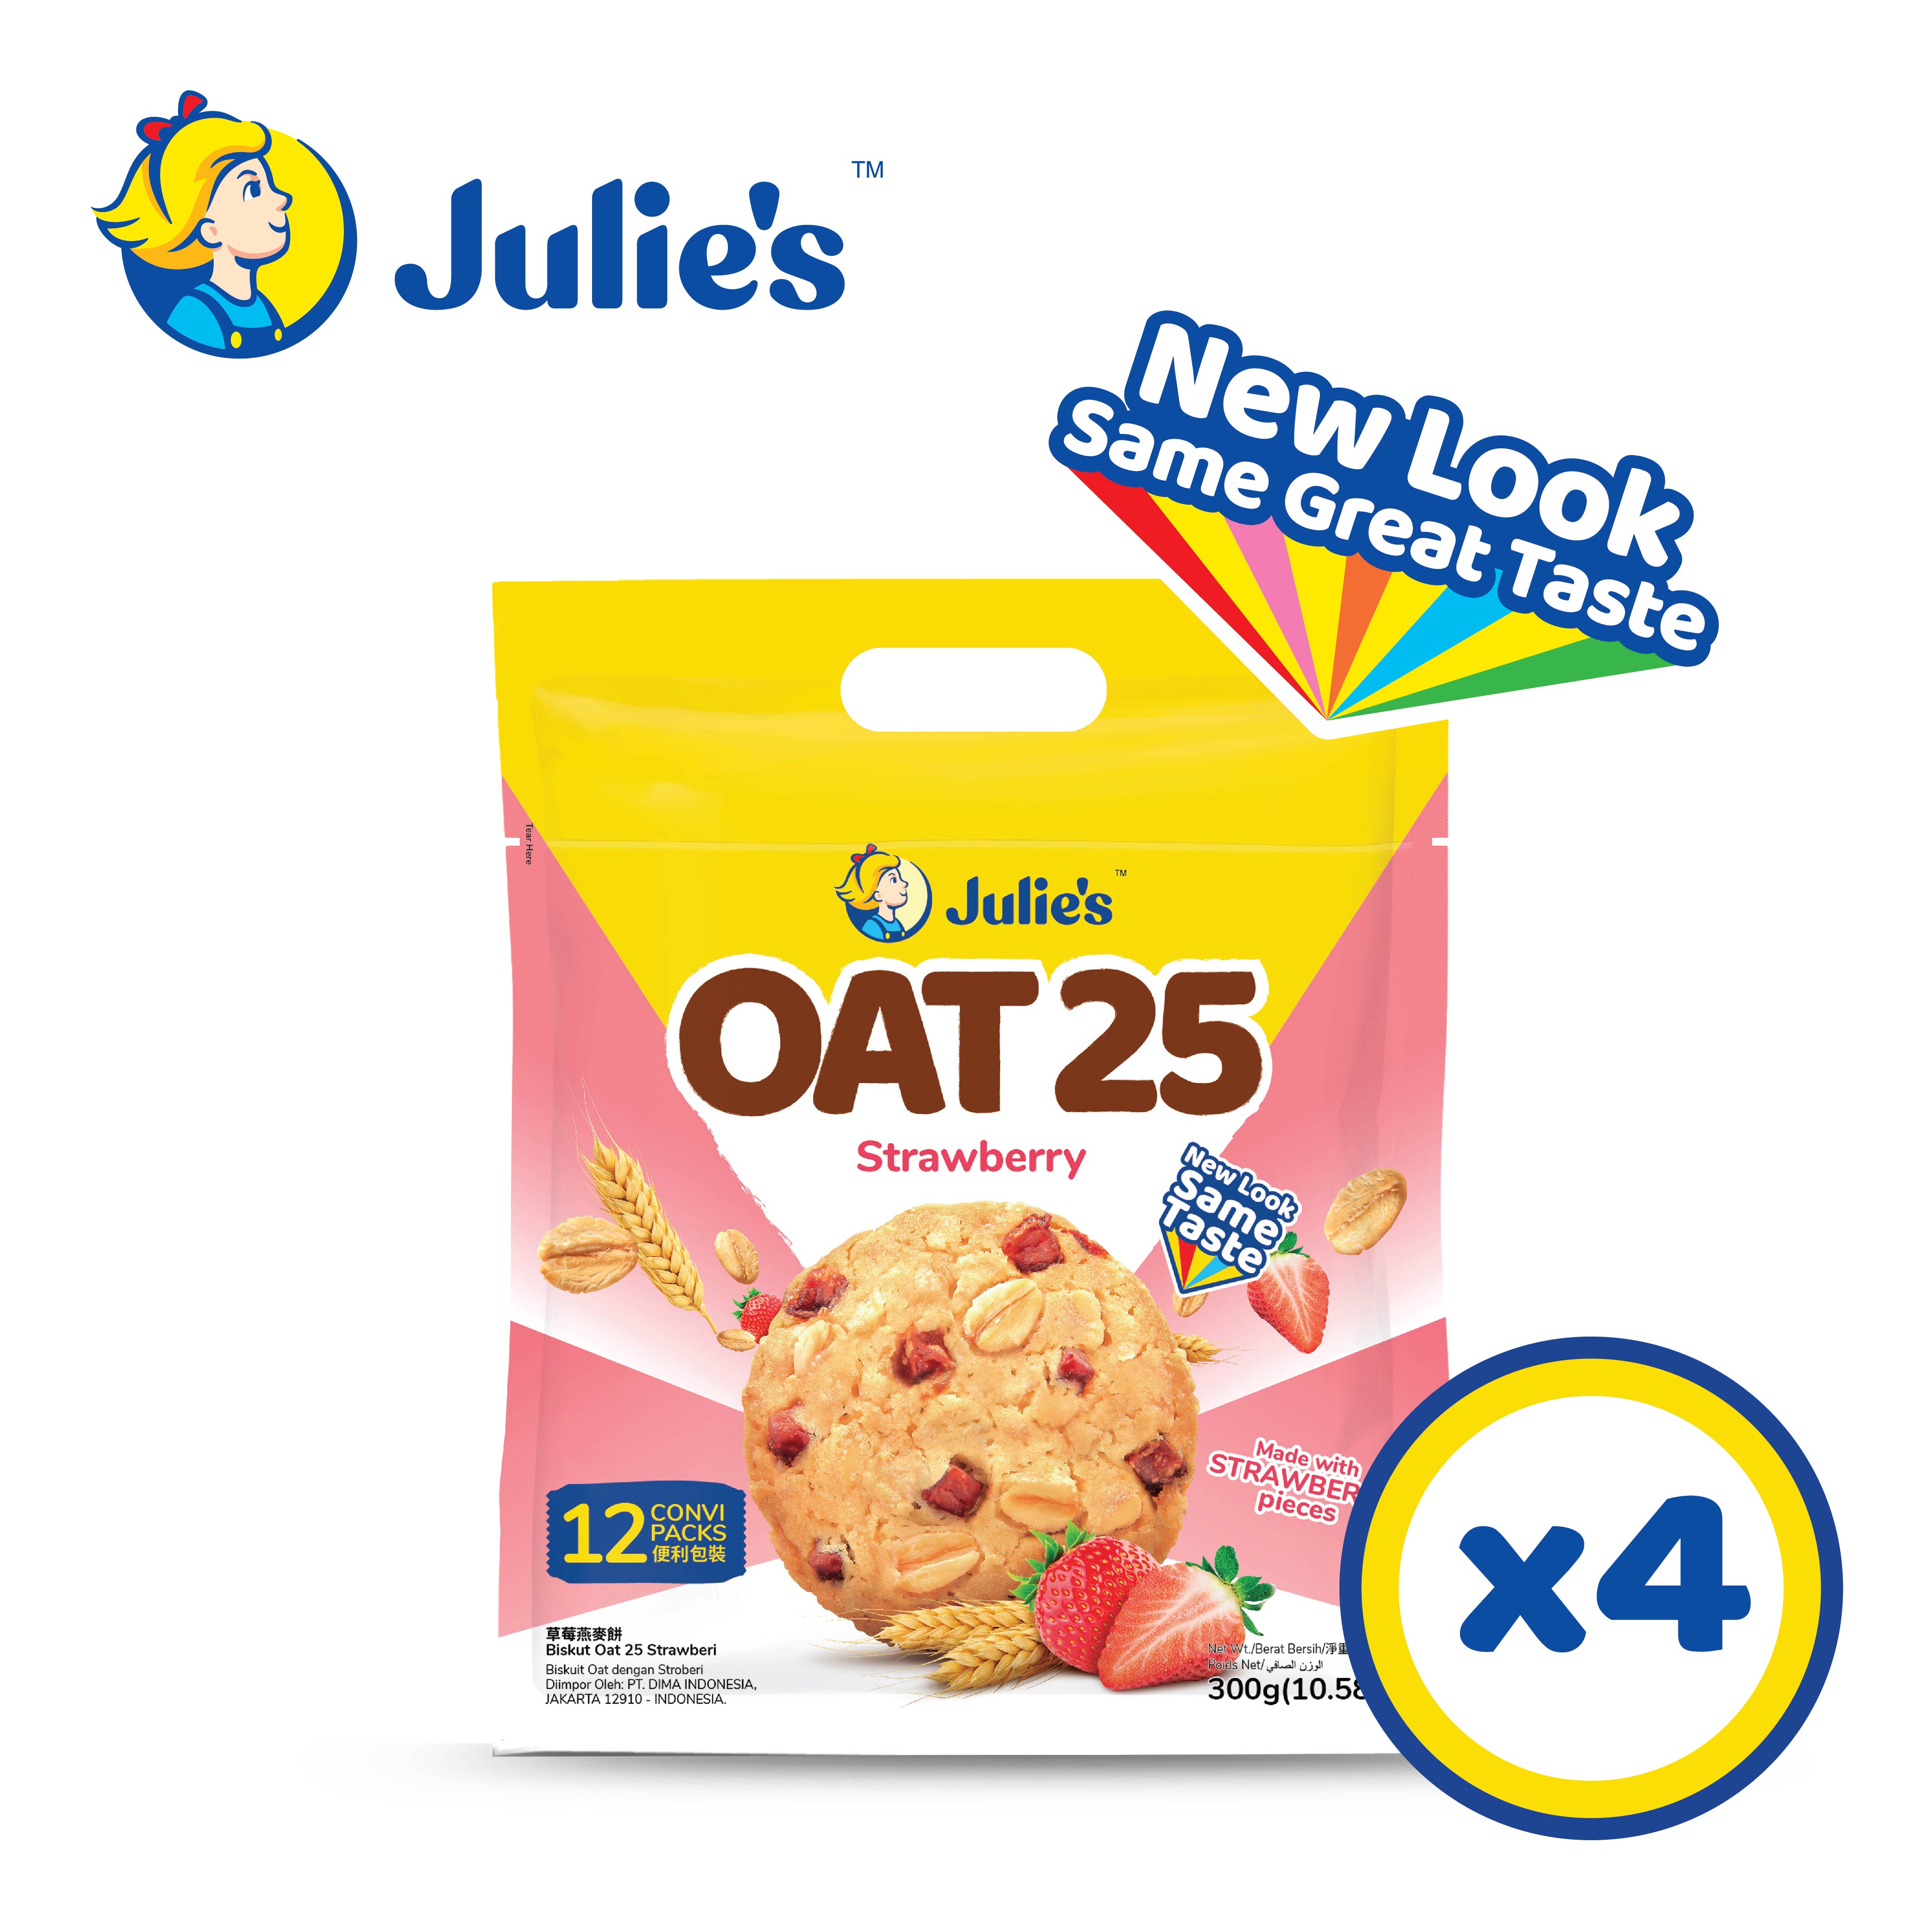 Julie\'s Oat25 Strawberry Biscuit 300g x 4 packs